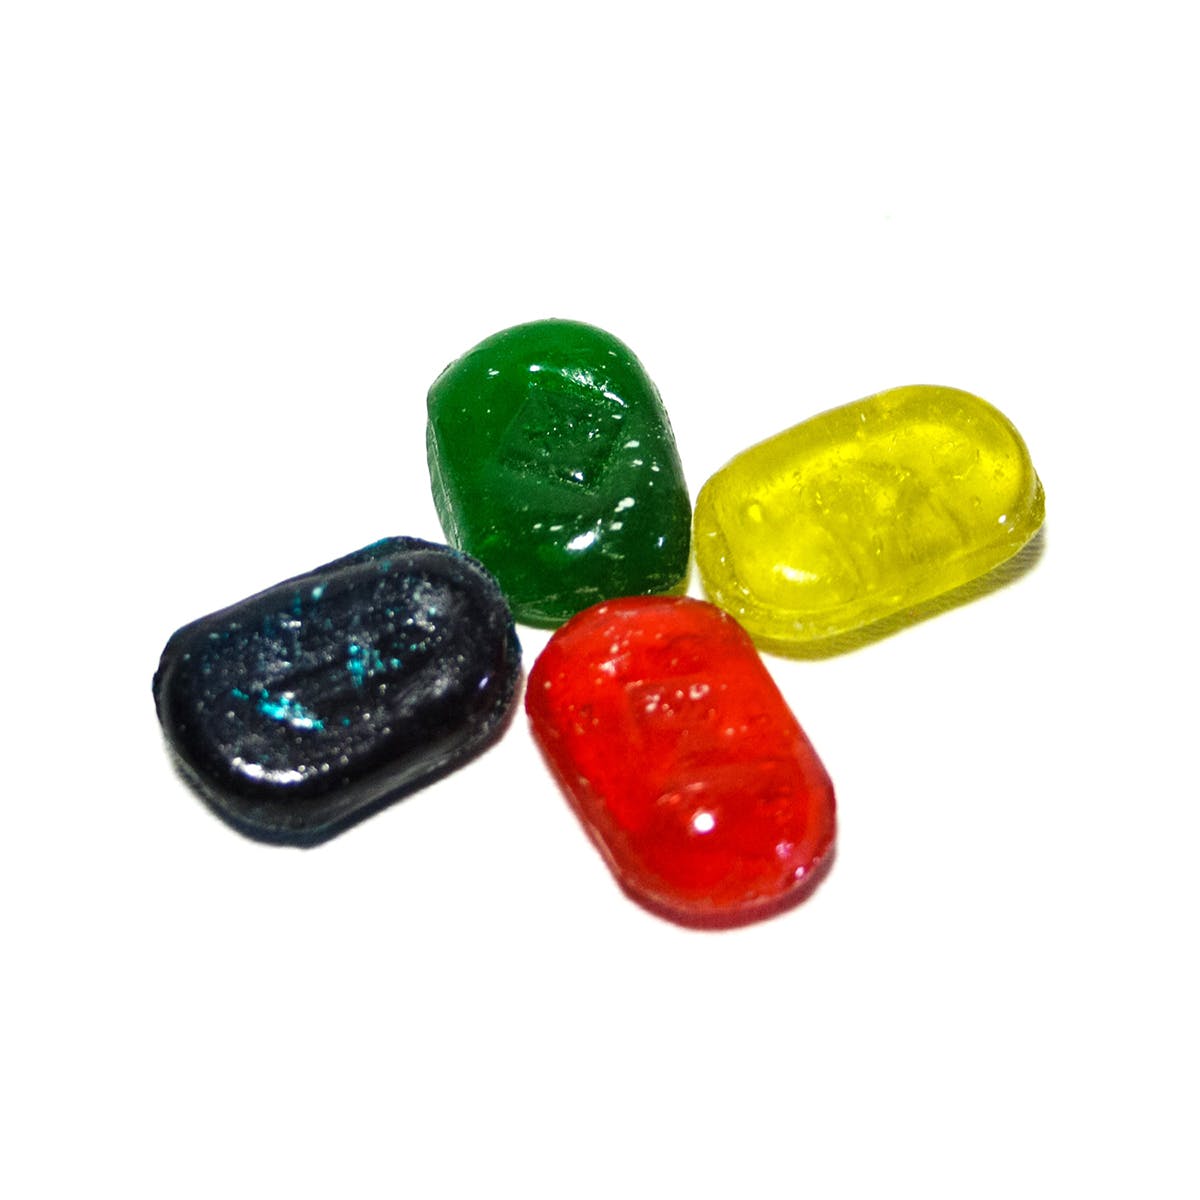 edible-mixed-fruit-lozenges-2c-11-200mg-med